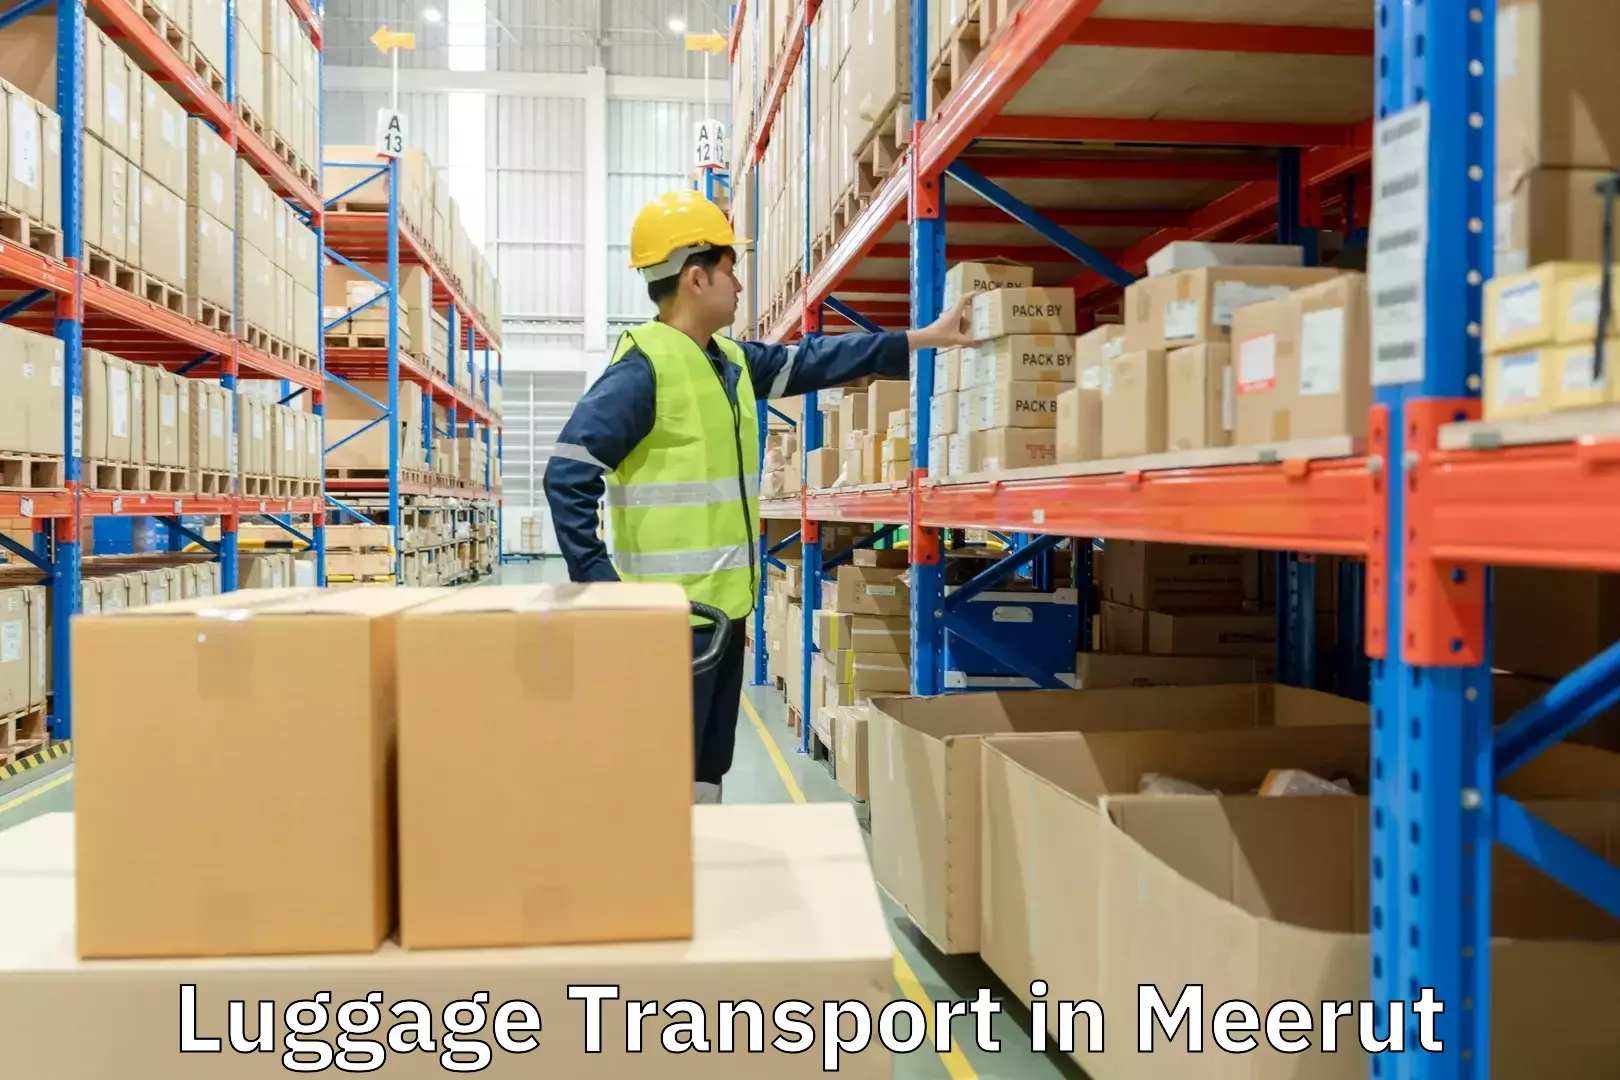 Automated luggage transport in Meerut